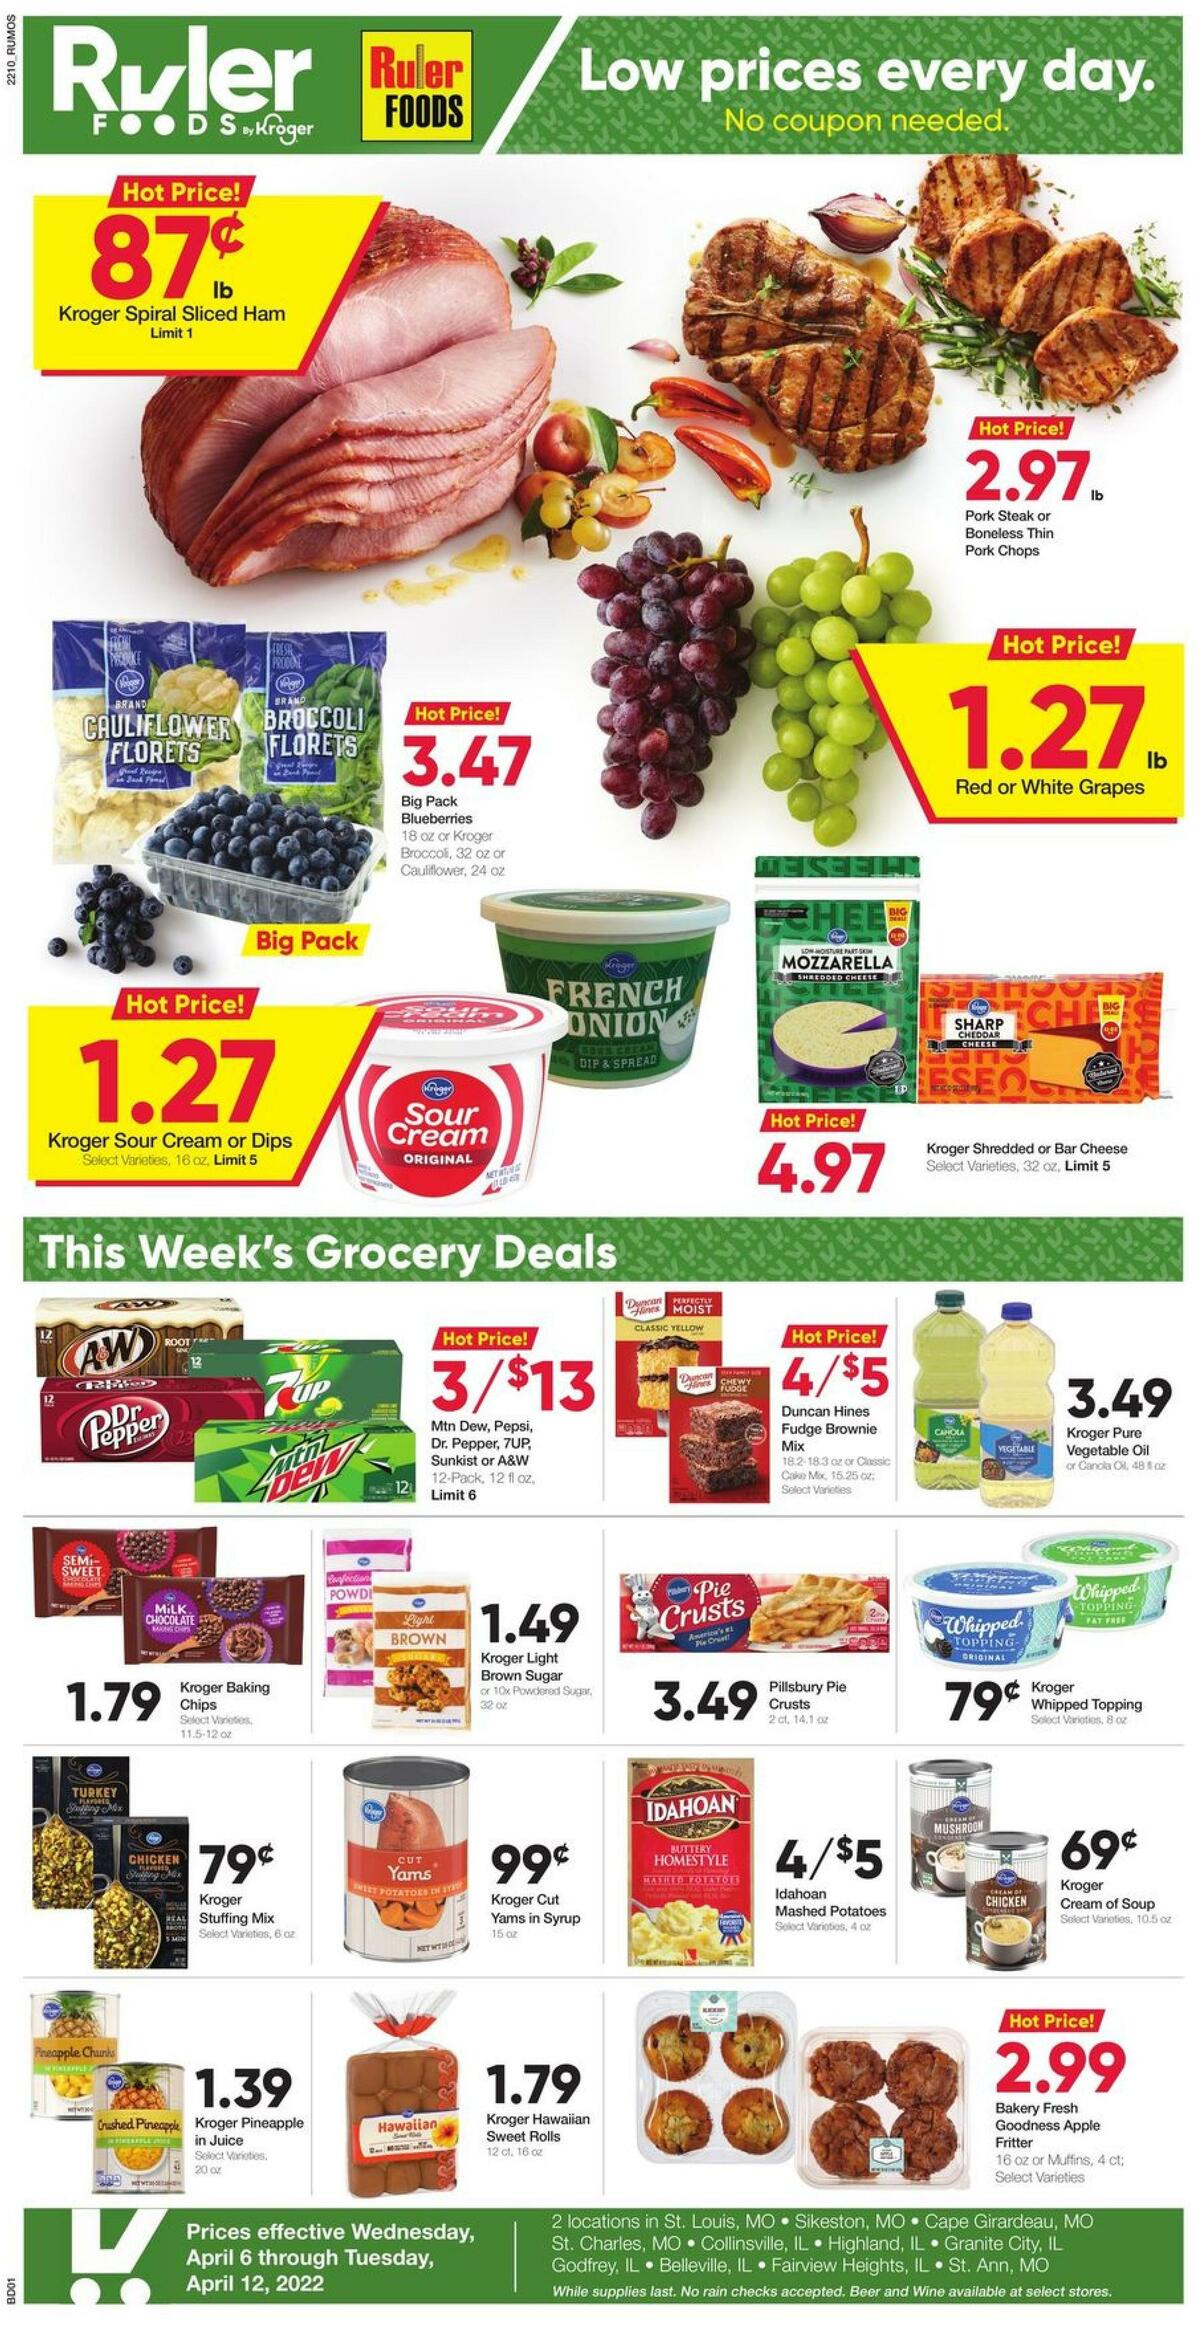 Ruler Foods Weekly Ad from April 6